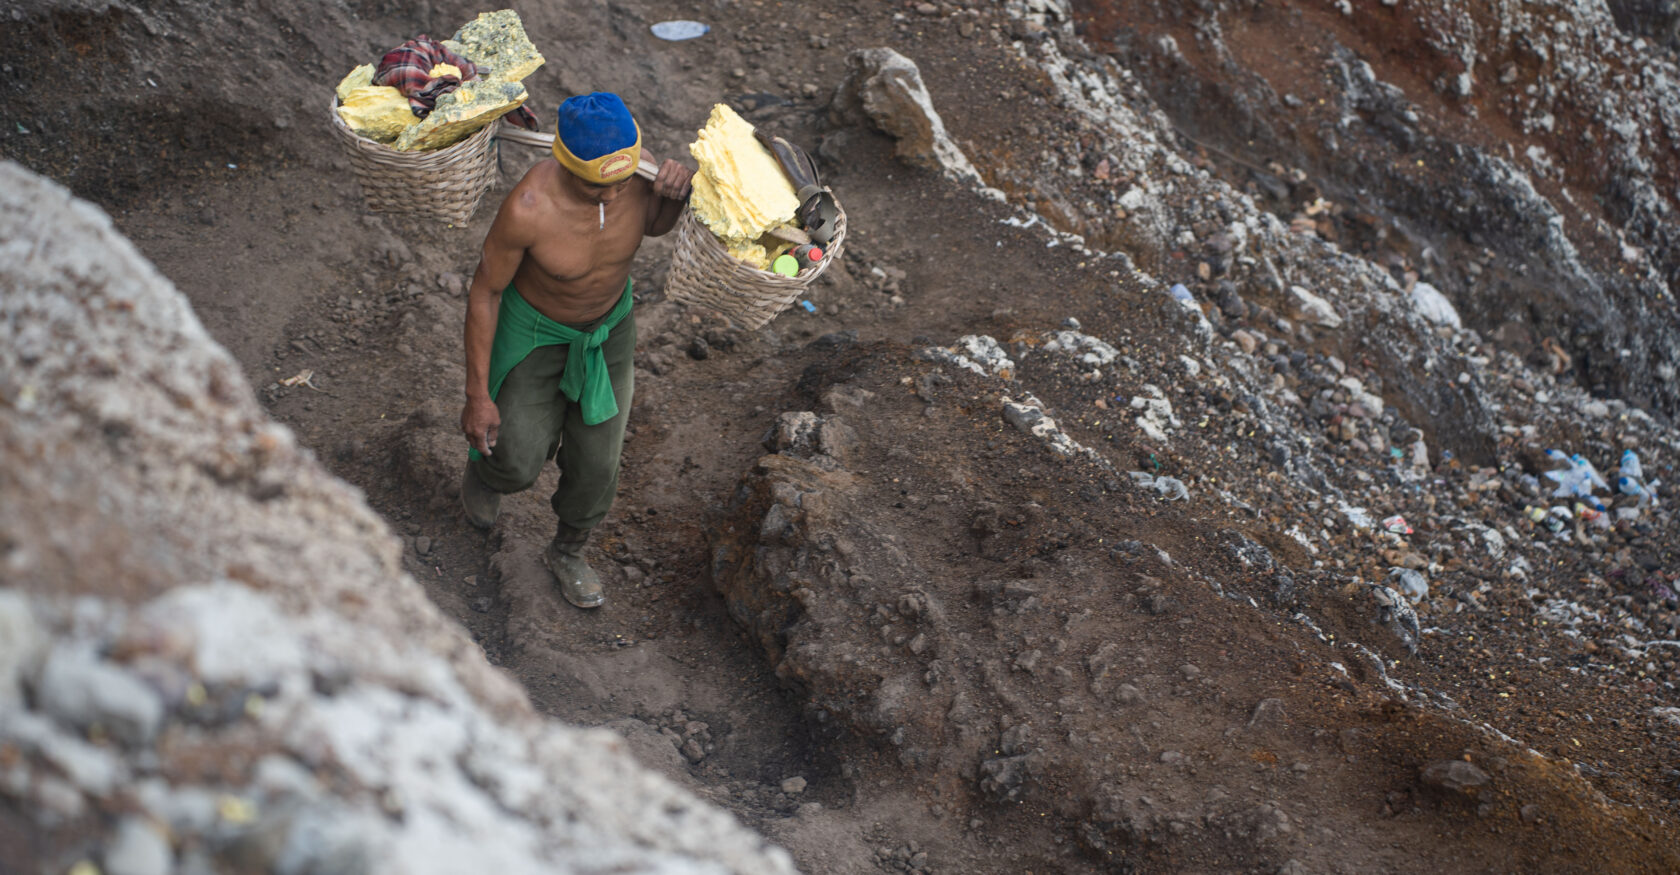 Miners typically earn around $5 per trip (Alexandros Zilos)